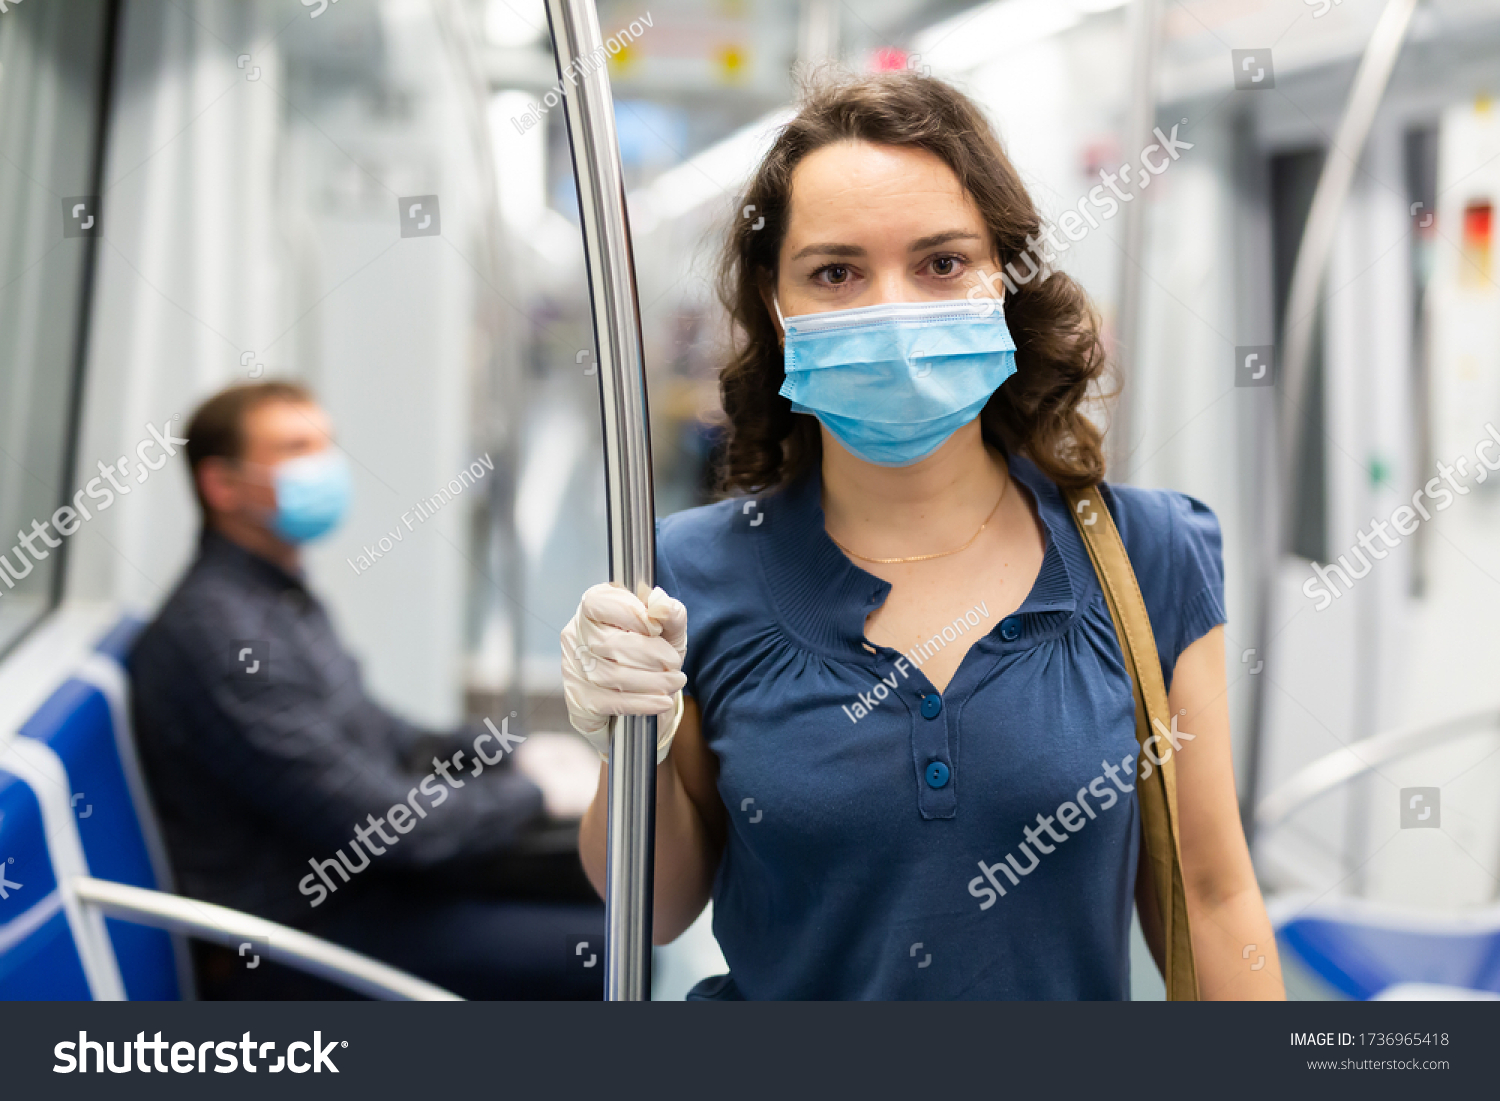 Portrait of focused woman in disposable mask and gloves traveling in subway train during daily commute to work in spring day. Concept of new life reality and precautions in COVID 19 pandemic #1736965418